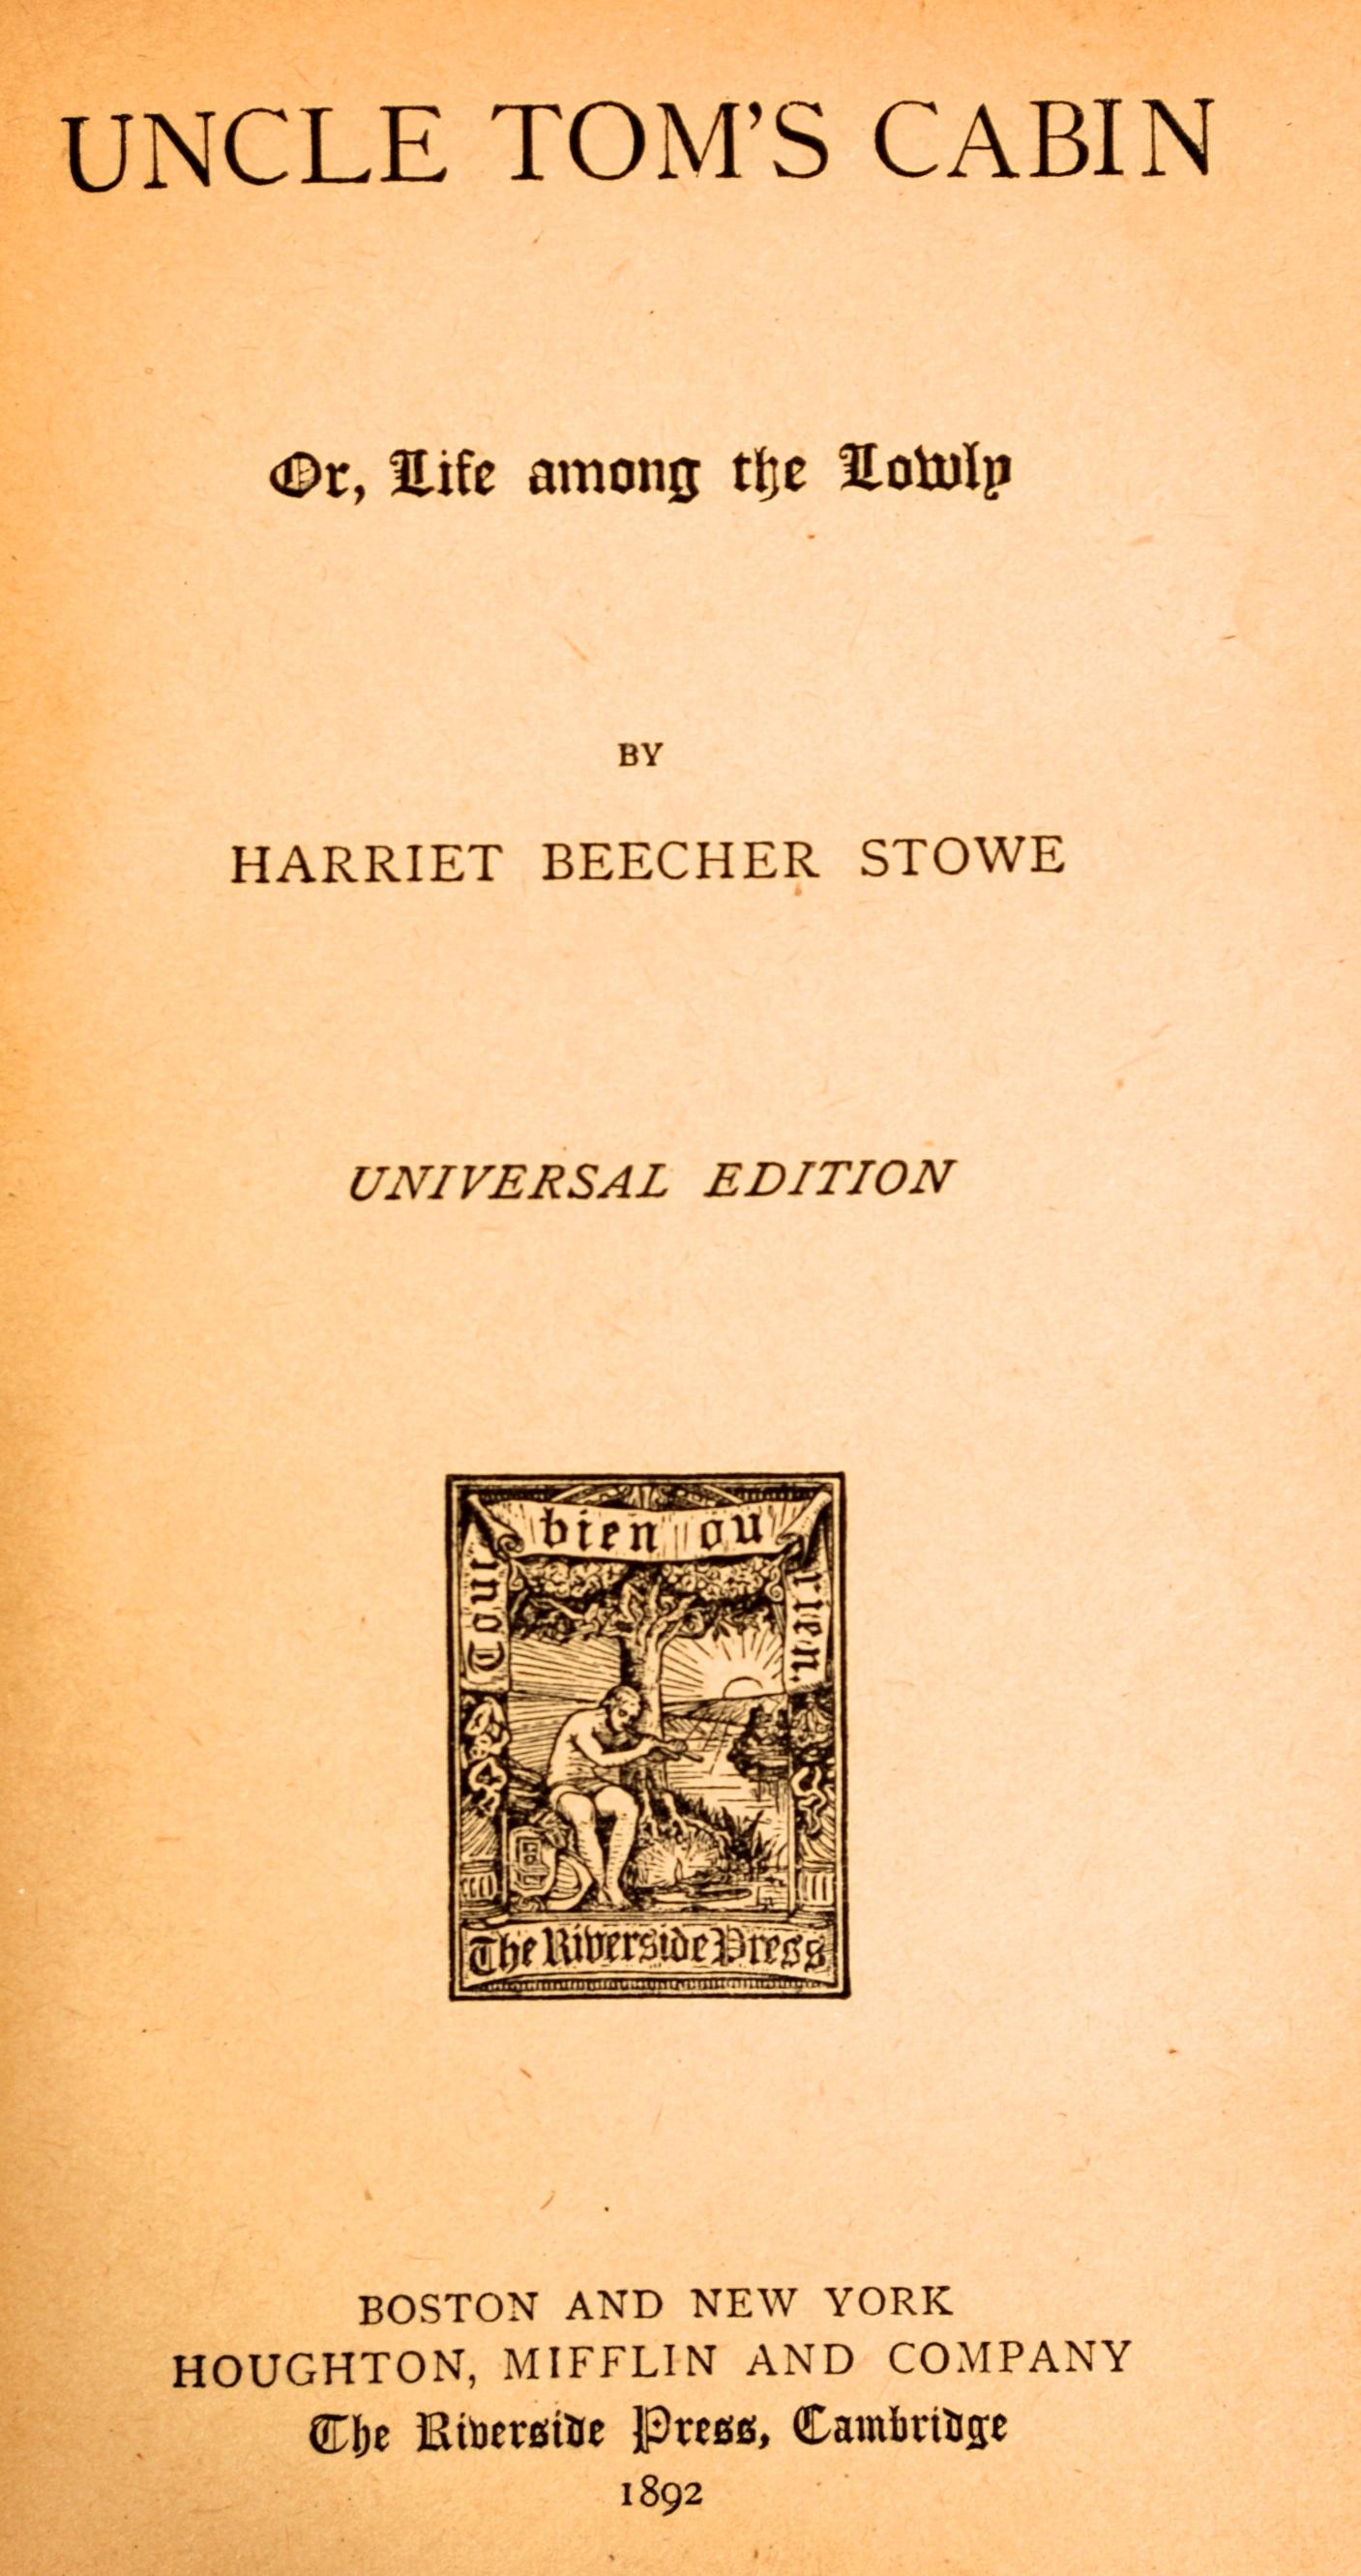 Uncle Tom's Cabin or Life Among the Lowly by Harriet Beecher Stowe. Houghton Mifflin, Boston, MA, 1892. Cloth hardcover with illustration of Uncle Tom on the cover. 273 pages. This book helped lay the groundwork for the Civil War. The sentimental